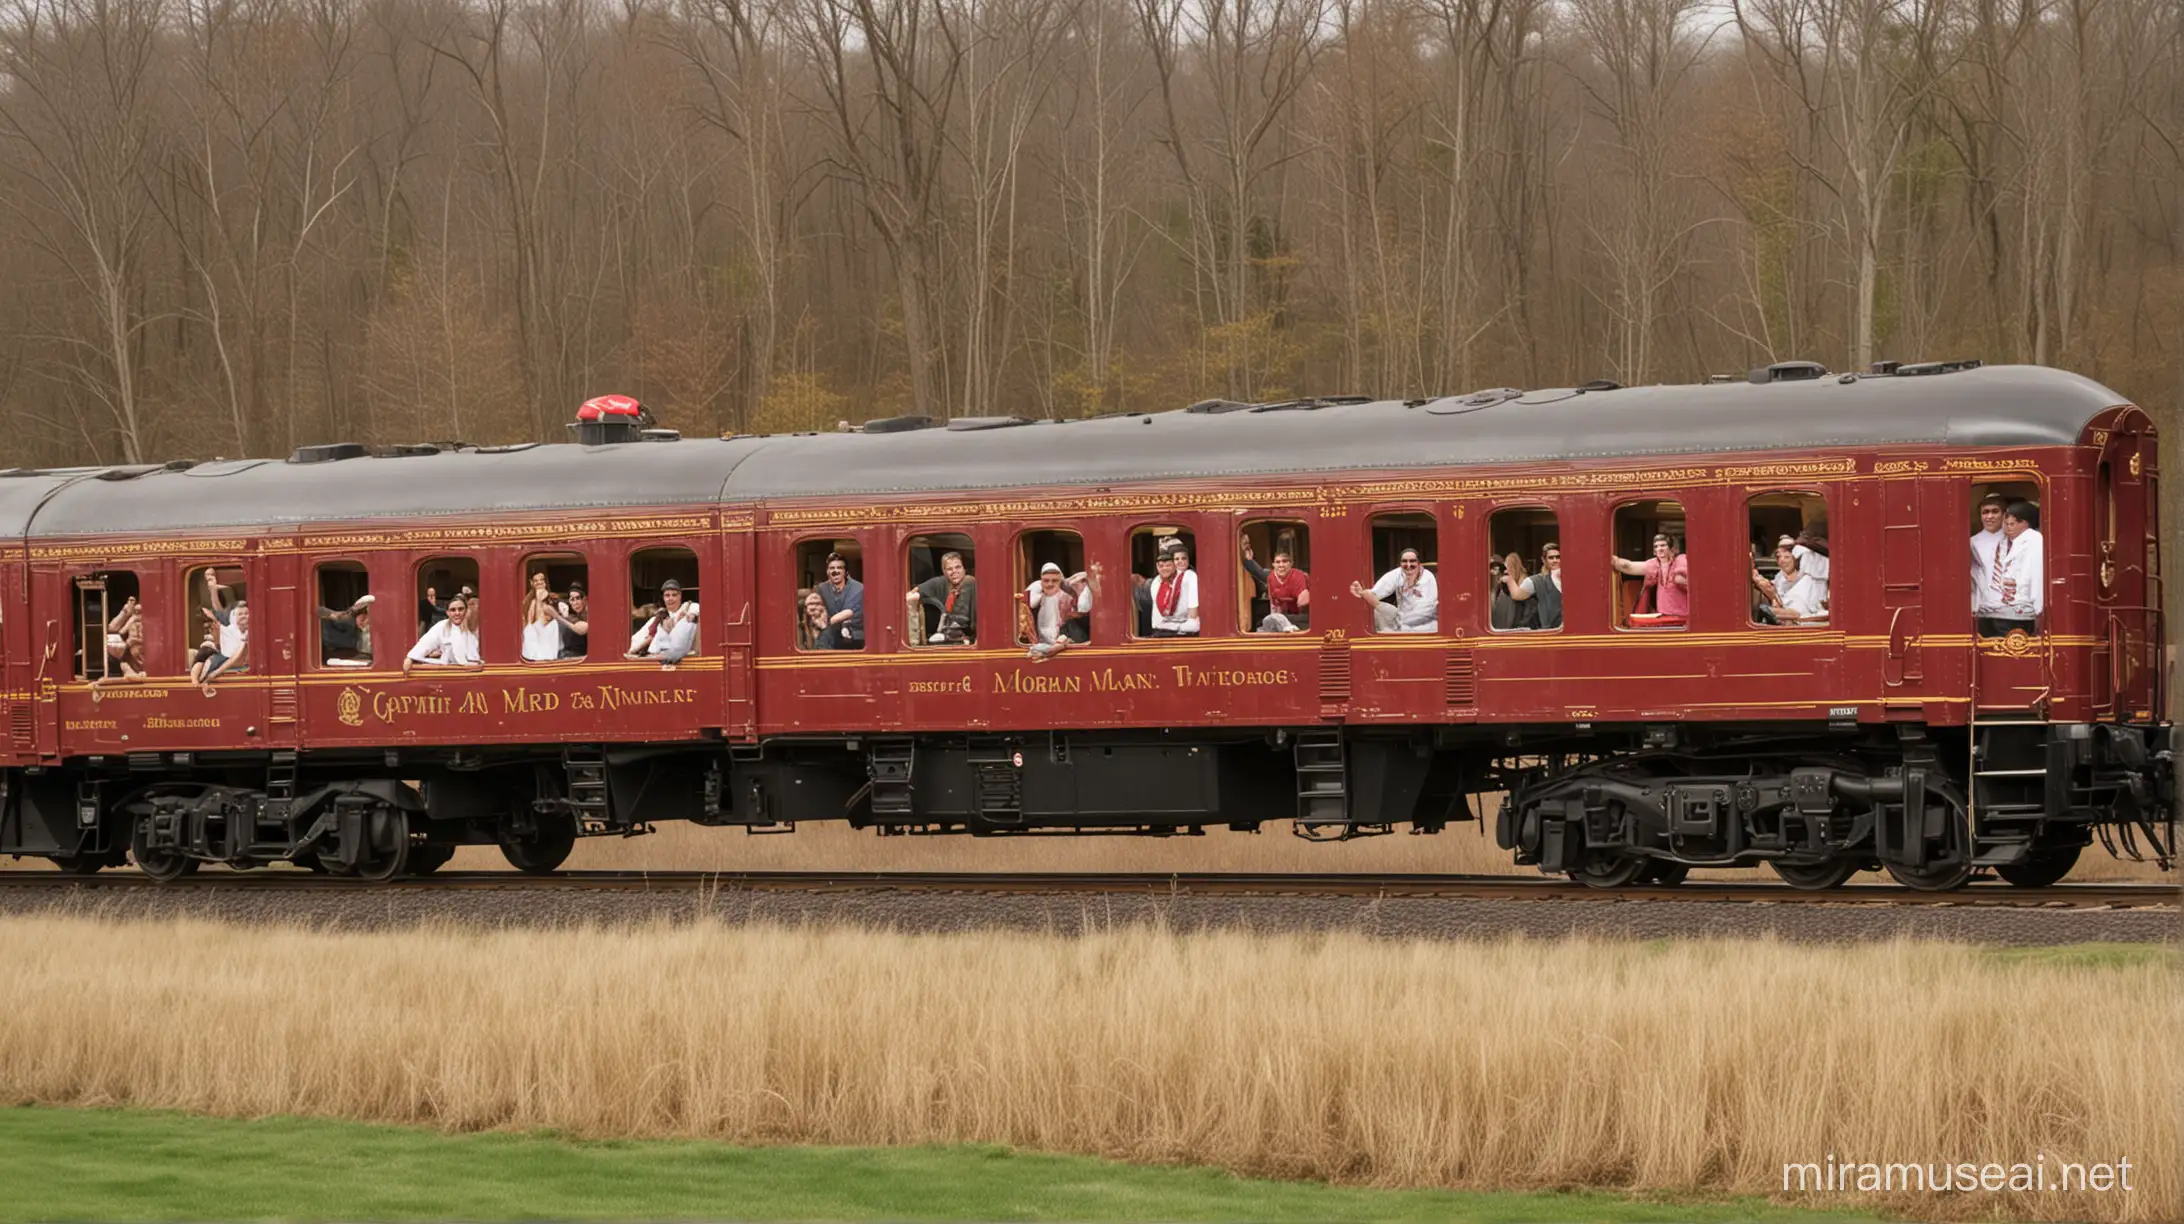 show me a 2006 Captain Morgan train with people inside looking really happy